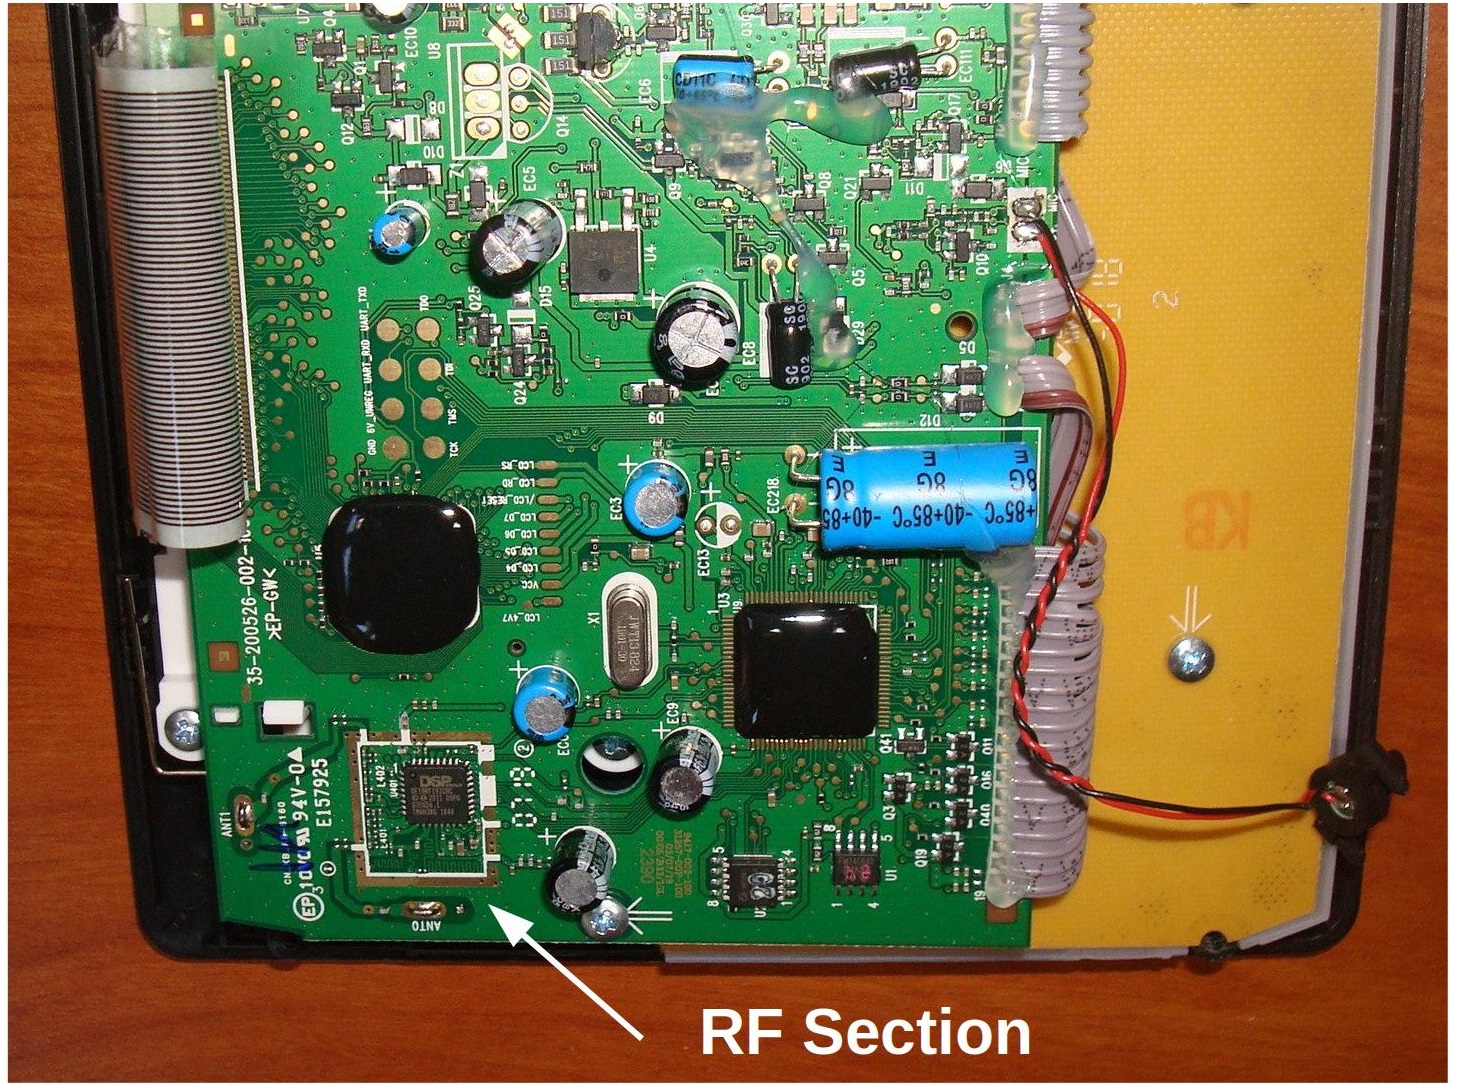 Figure 3: Base station printed circuit board showing the location of the RF section.